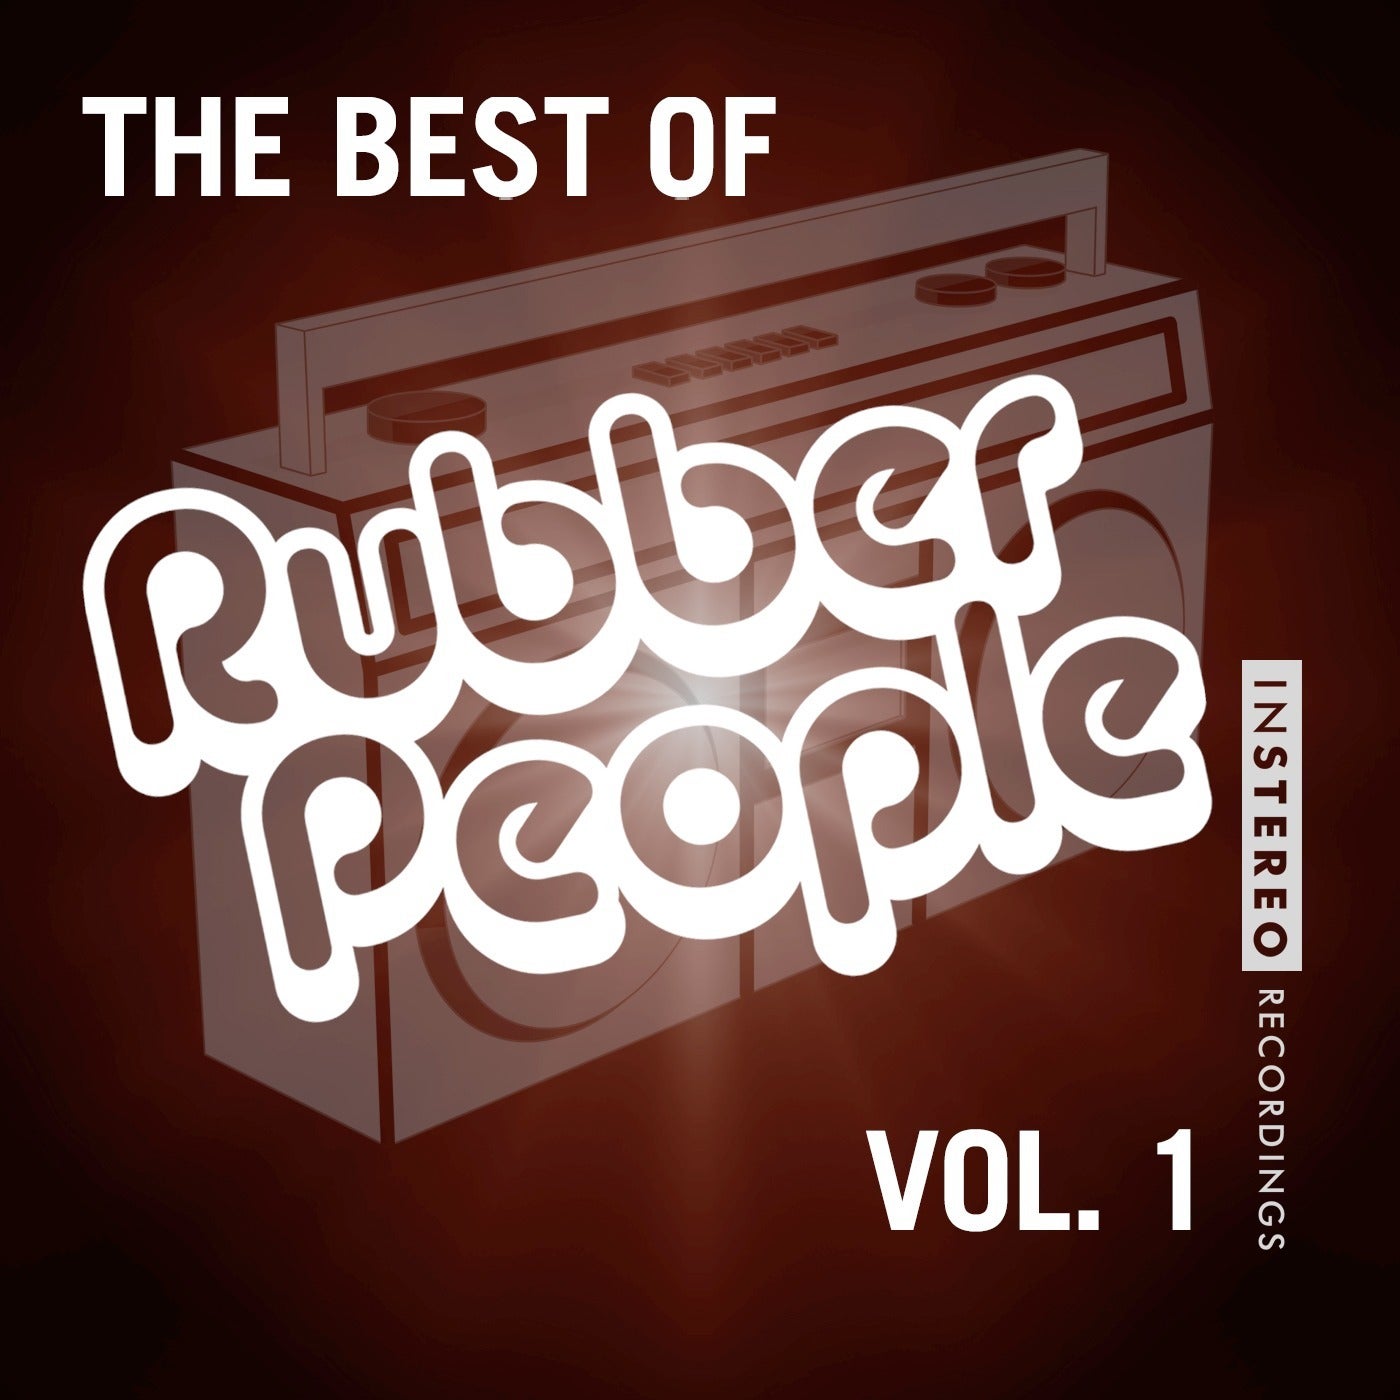 The Best of Rubber People, Vol. 1